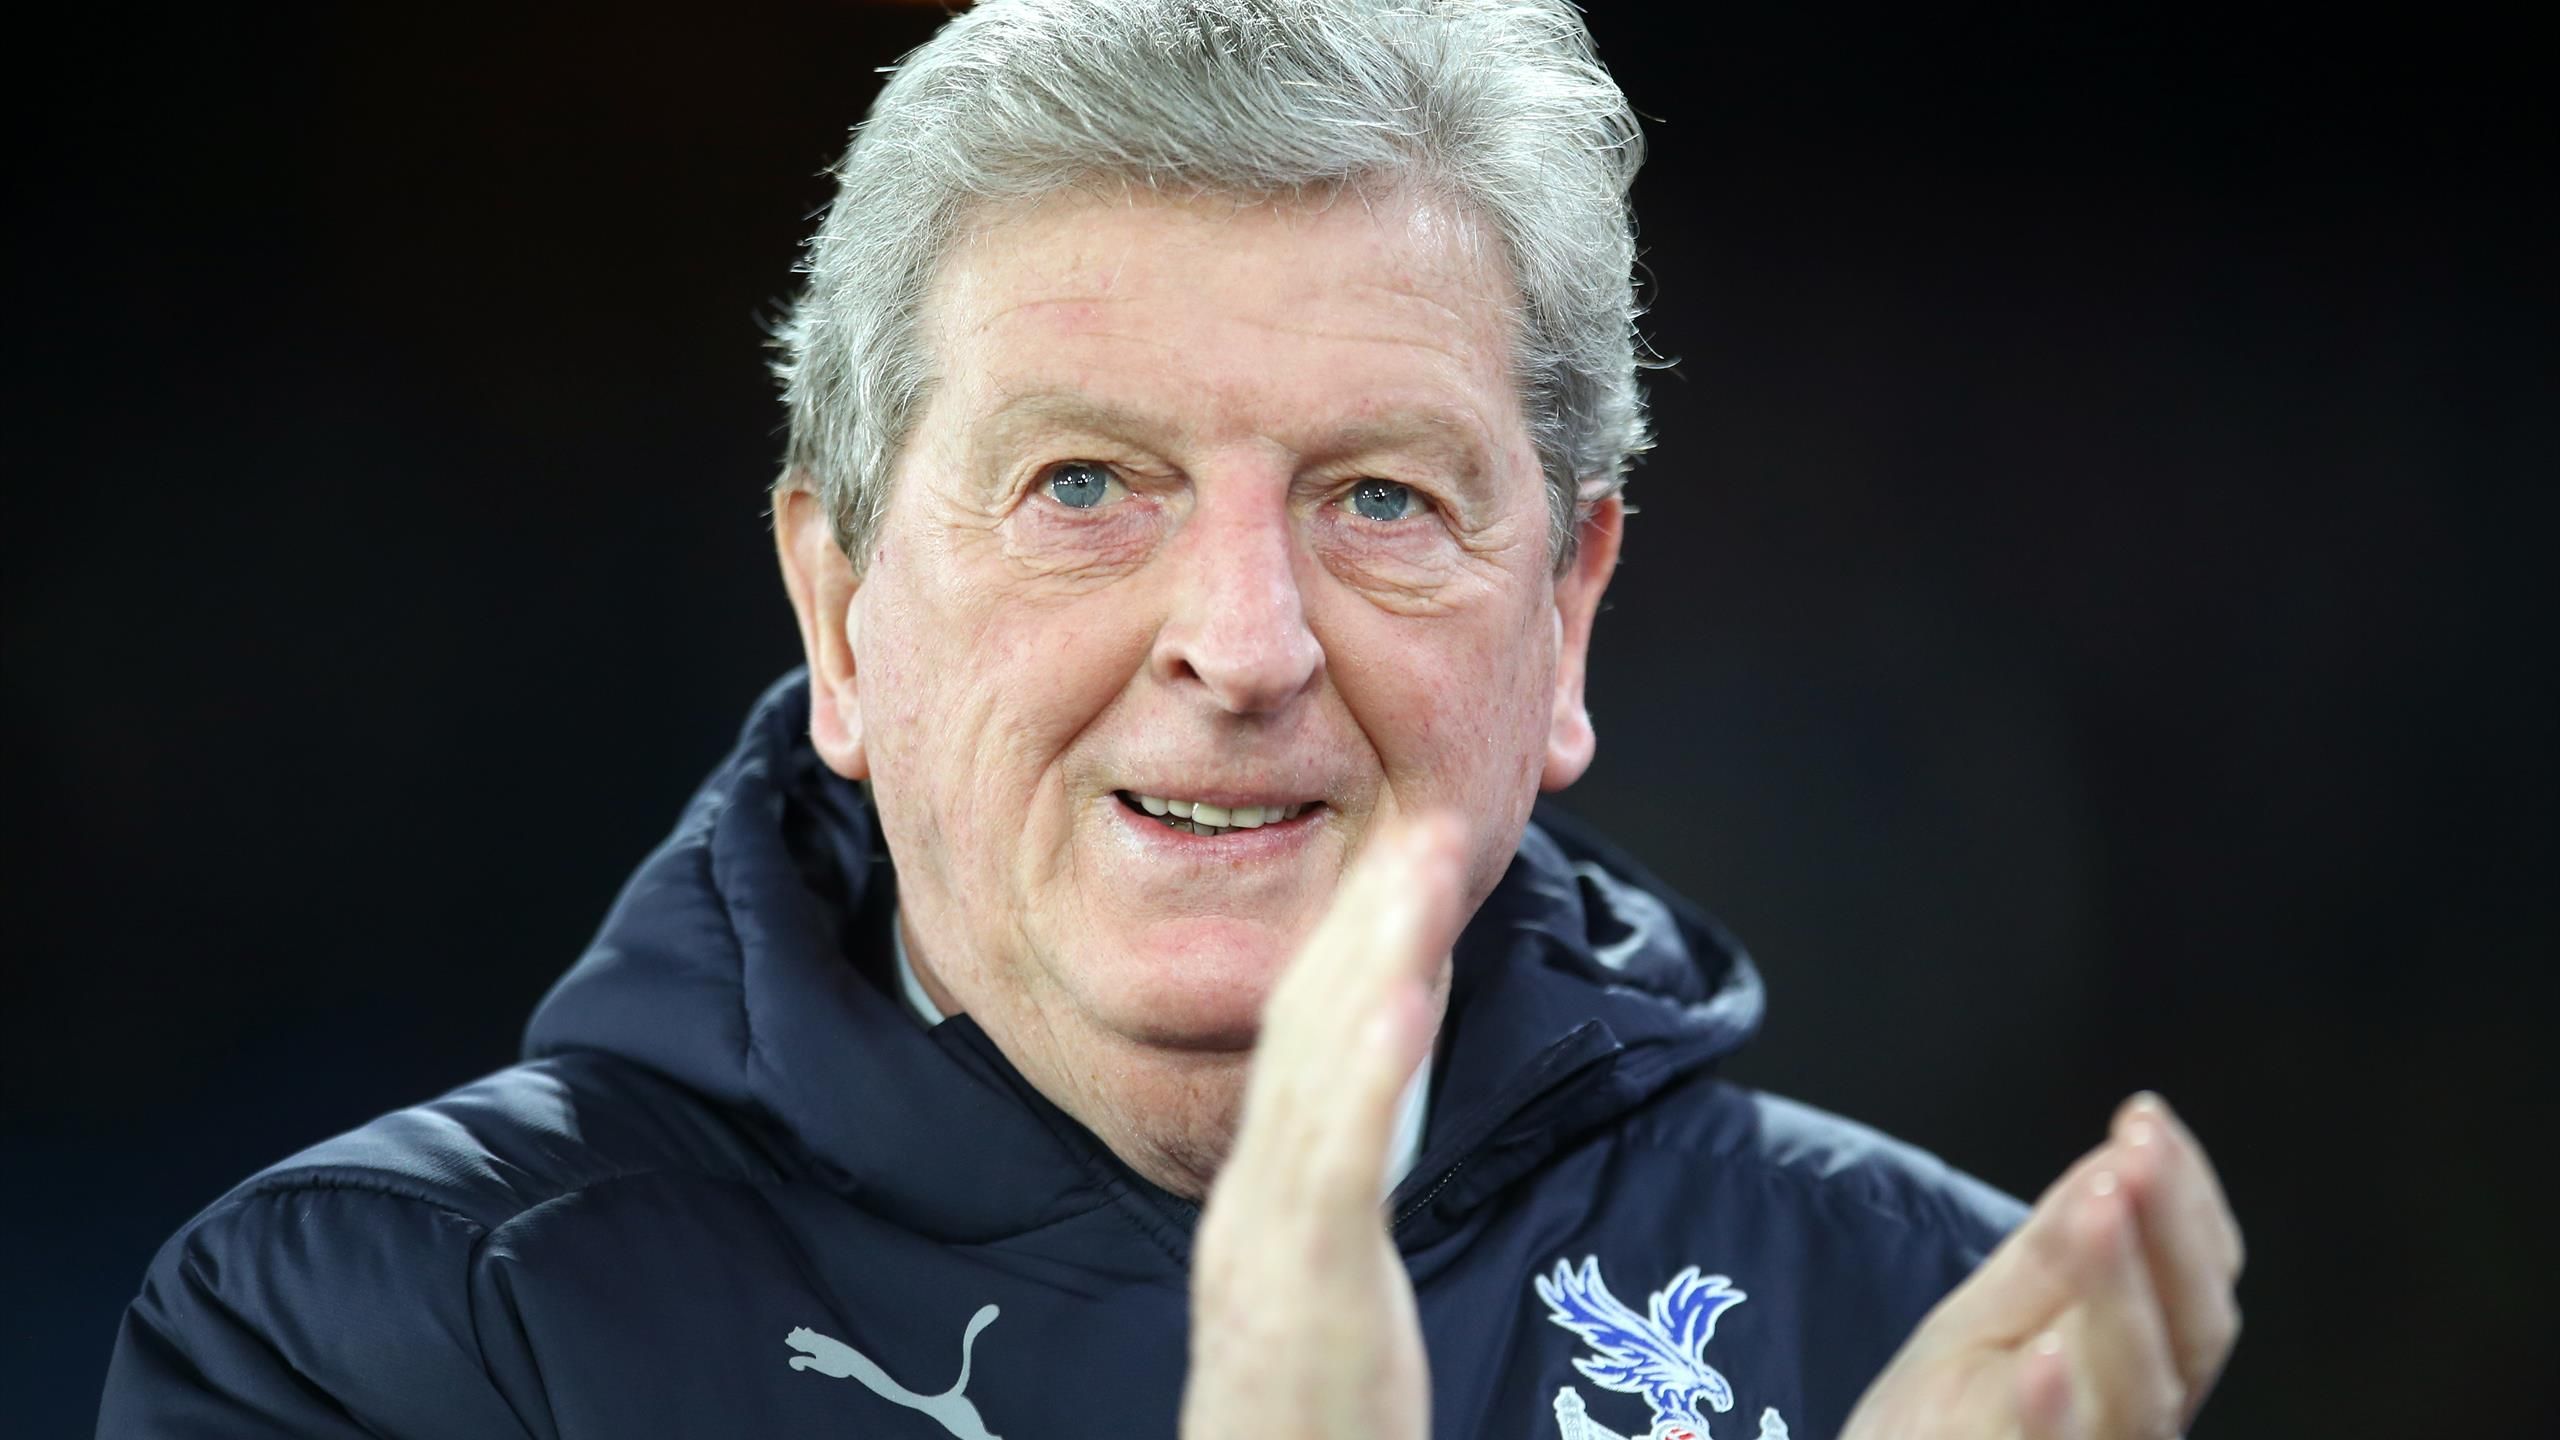 i-understand-journalist-hints-something-is-happening-at-palace-that-hodgson-doesnt-like…..